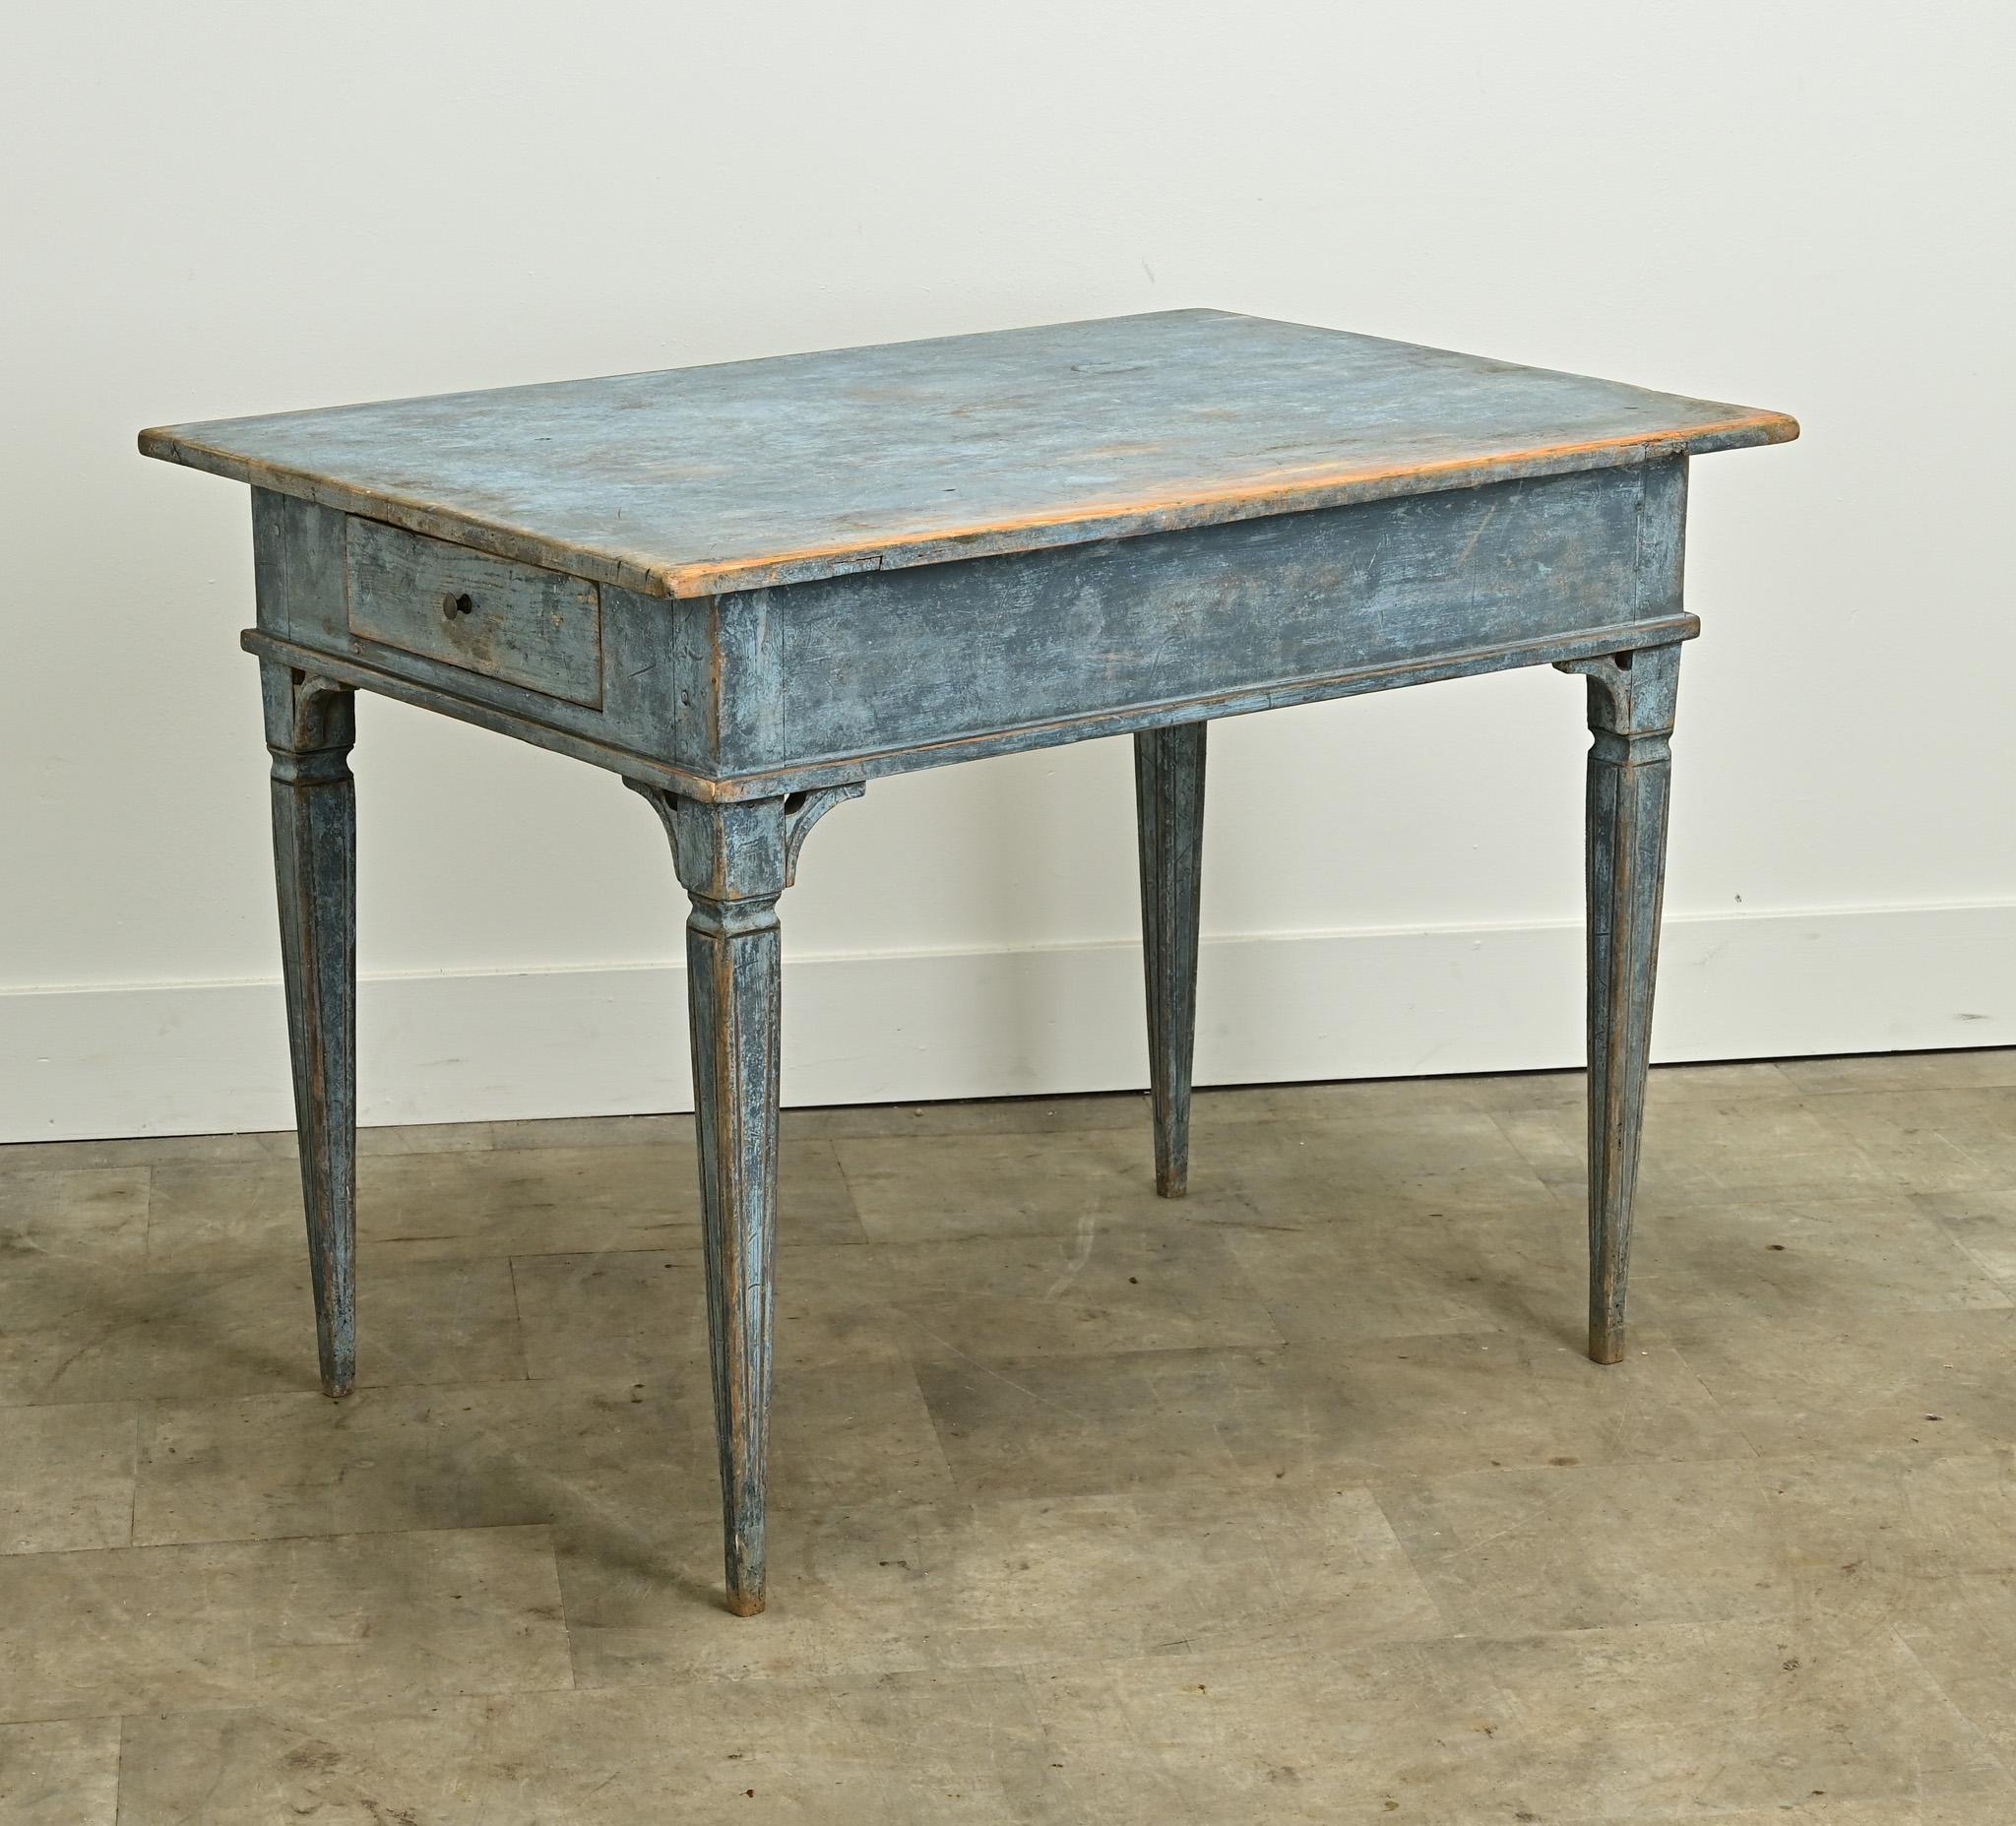 A Swedish Gustavian style center table is sure to make a statement in any interior. This table has its original worn blue painted finish and features a removable top over an apron with two drawers, each with a turned knob. The whole sits on tapered